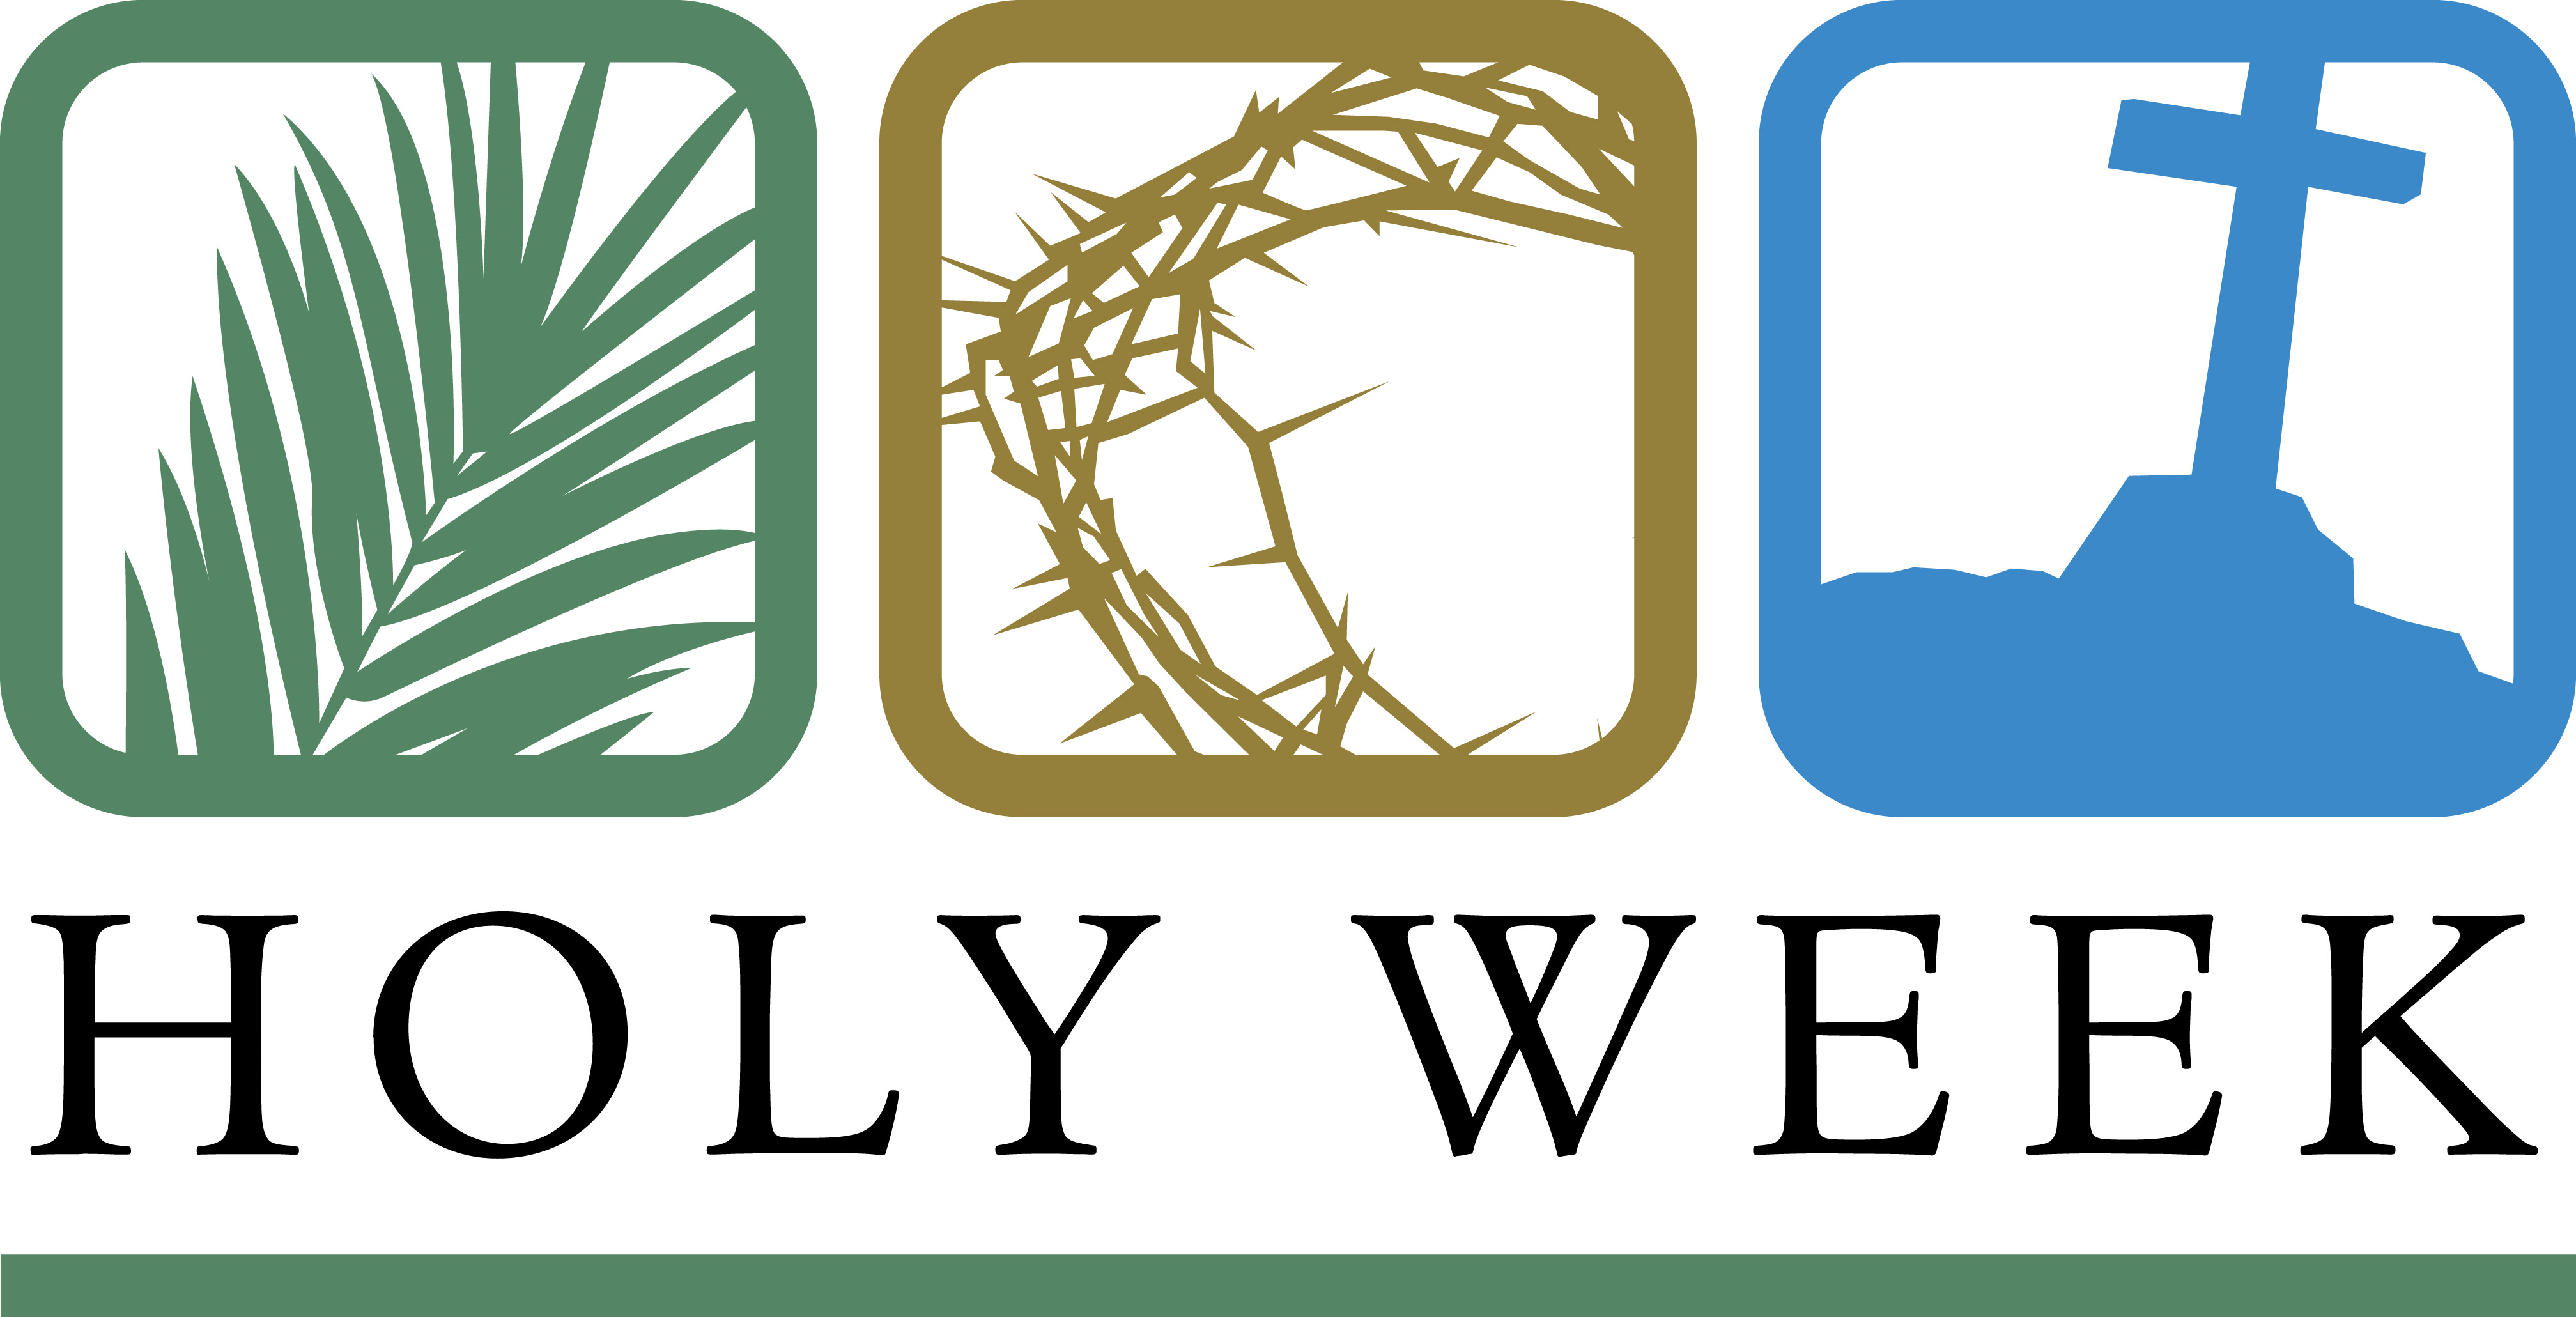 Top 3 Popular Holy Week Destinations in Cagayan de Oro, holy week, Holy Week Destinations, Divine Mercy Holy Week Destinations, The Our Lady of Guadalupe Shrine, Malasag, Feast of Divine Mercy, Panaad, Holy Week Destinations in Cagayan de Oro